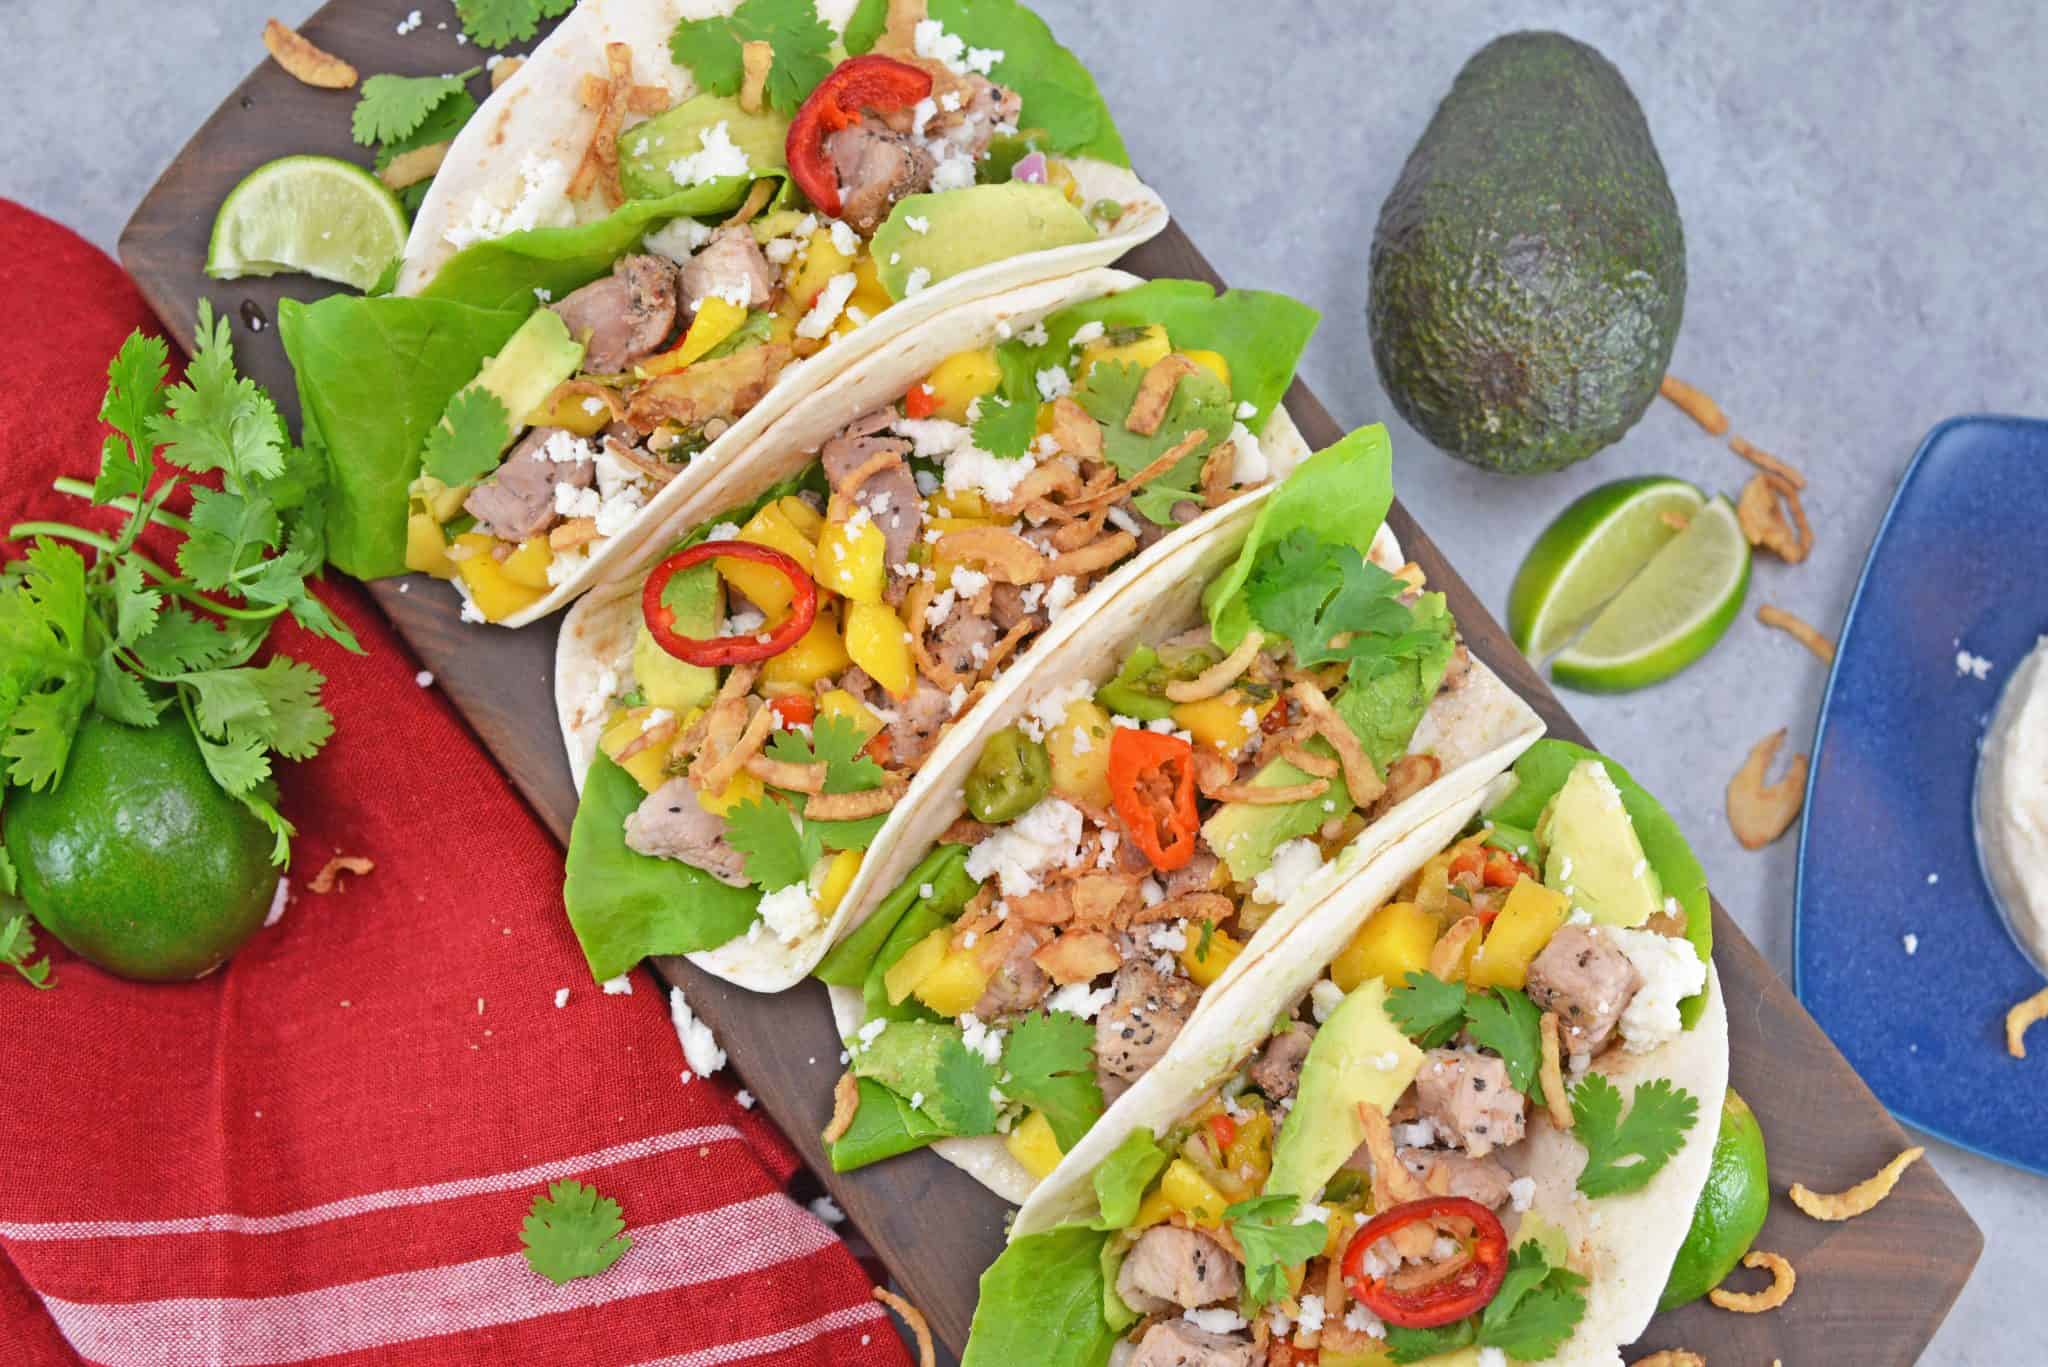 Crispy Pork Tacos are soft tacos filled with mango salsa, cool avocado, crumbly queso fresco, butter lettuce and crispy onion straws. 